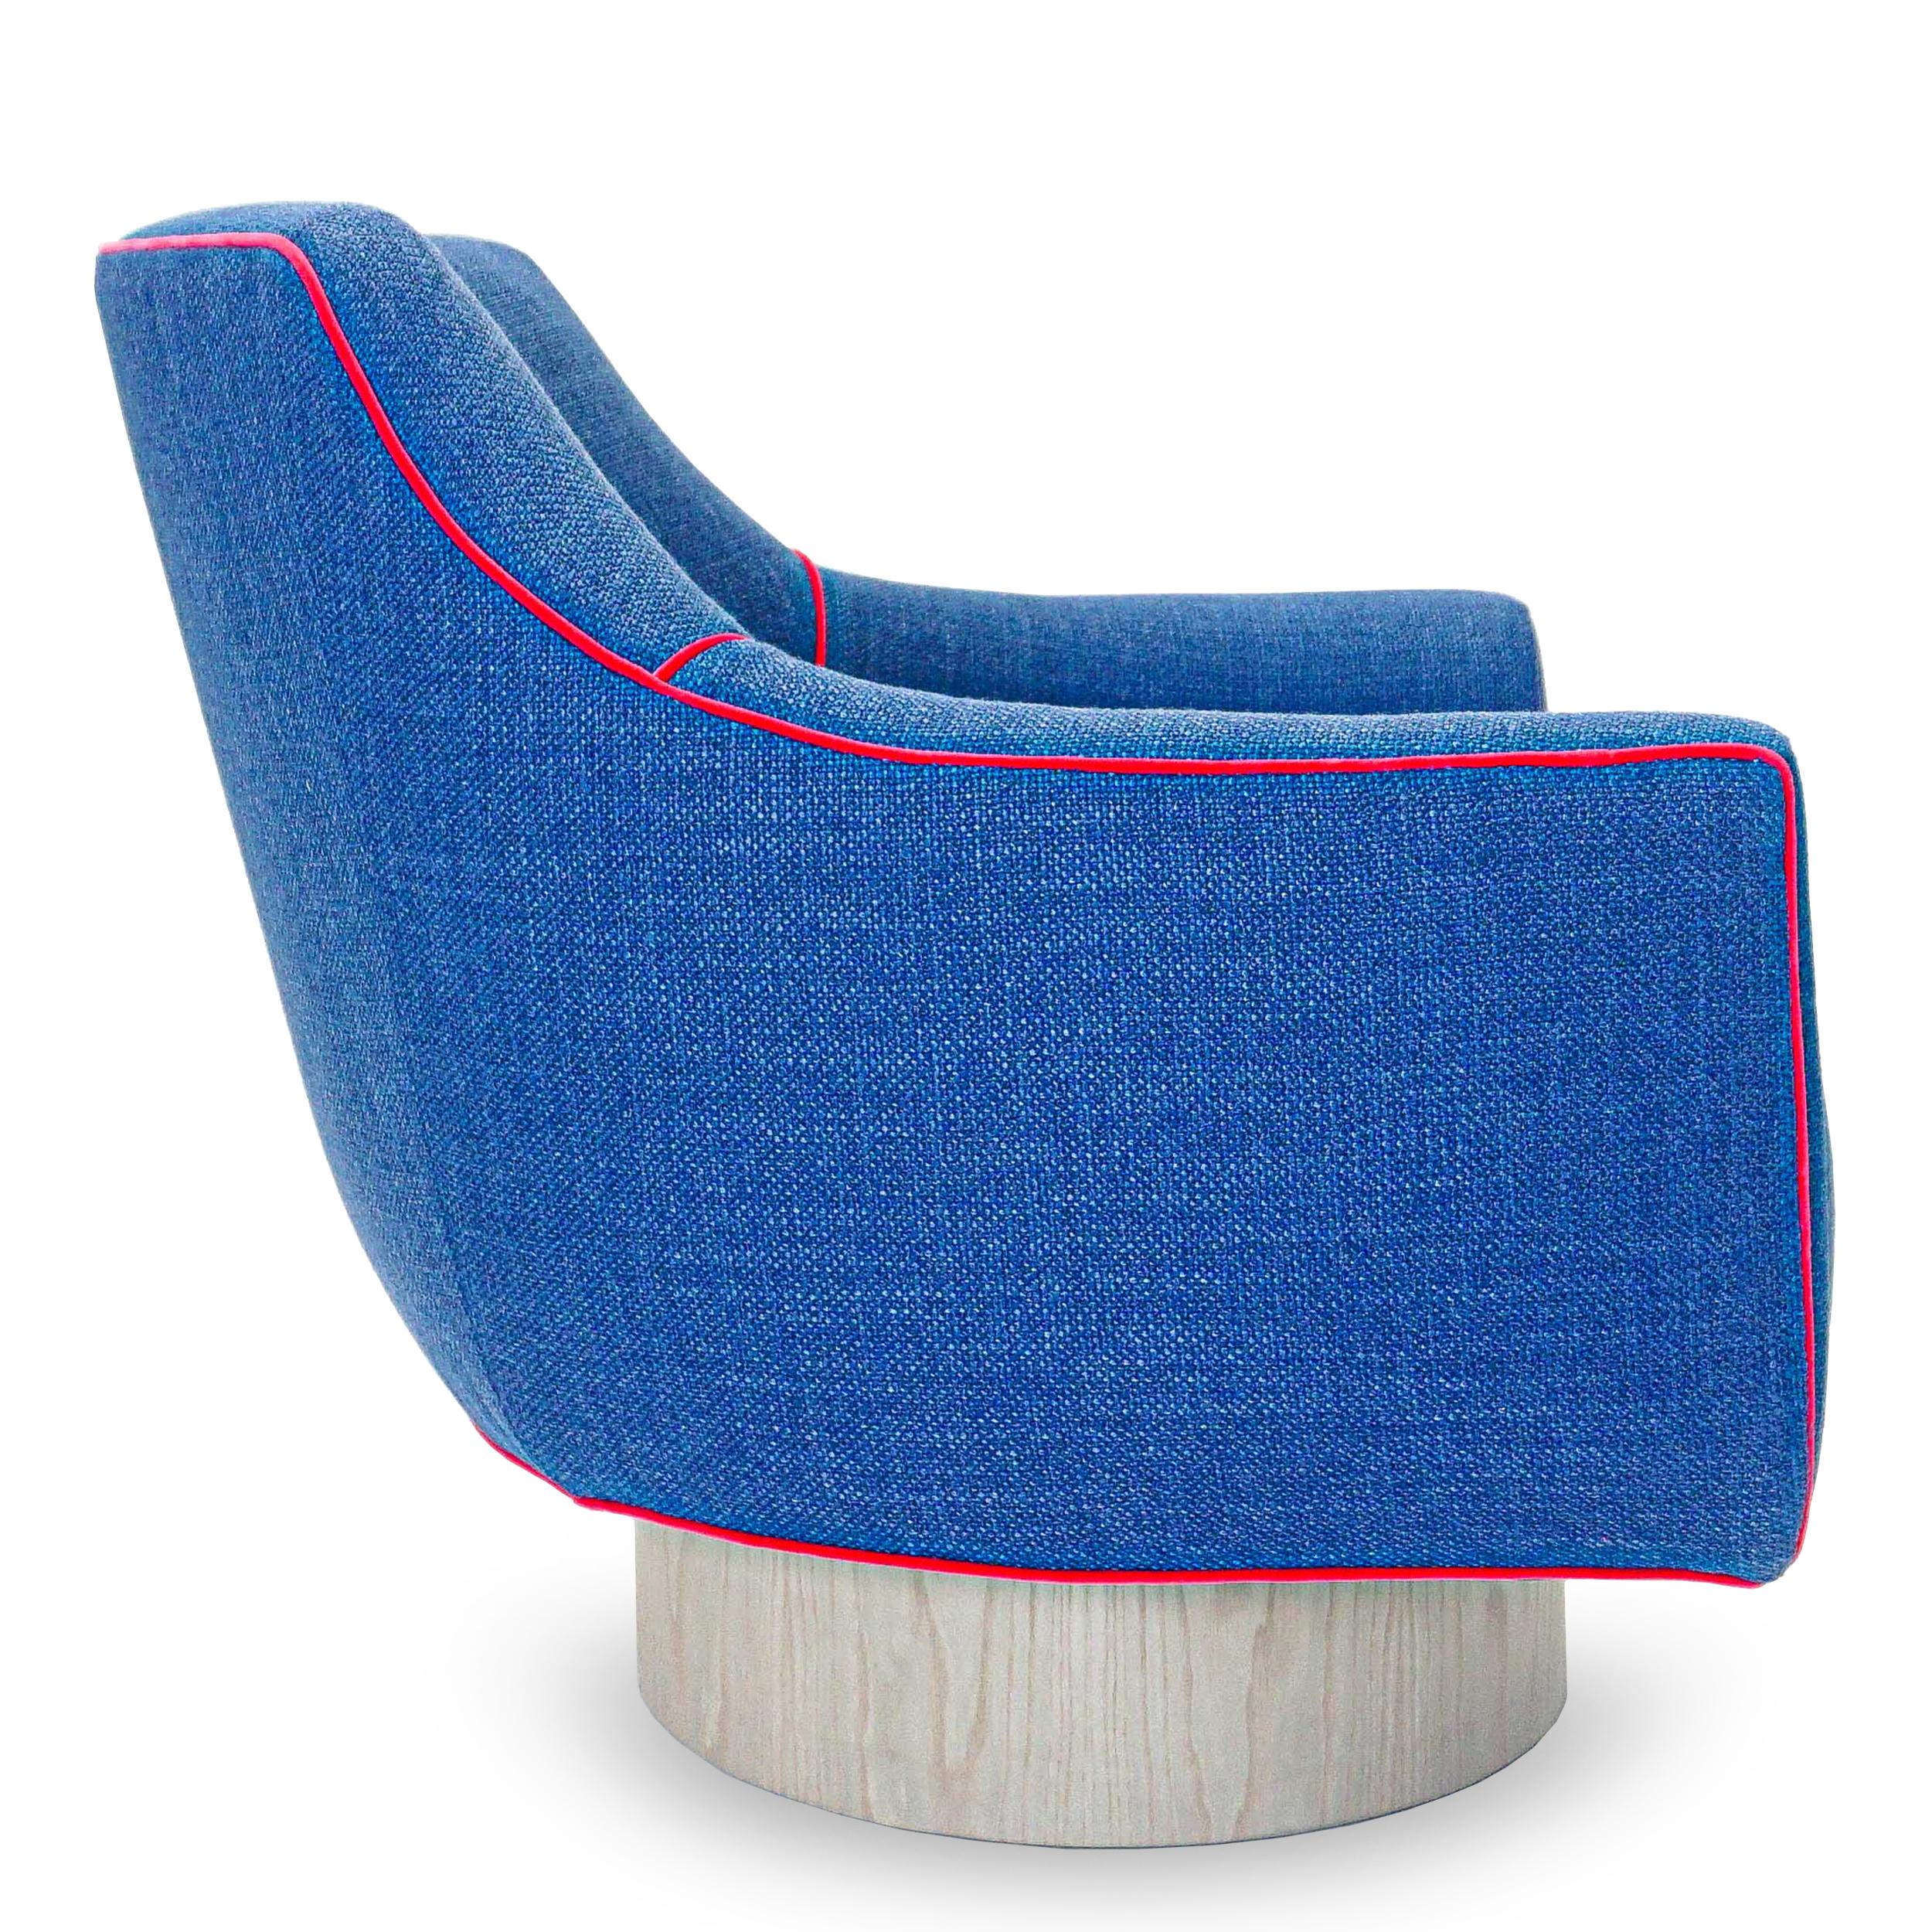 Contemporary Modern Swivel Chair in Blue Woven and Fuchsia Velvet Accent Welting For Sale